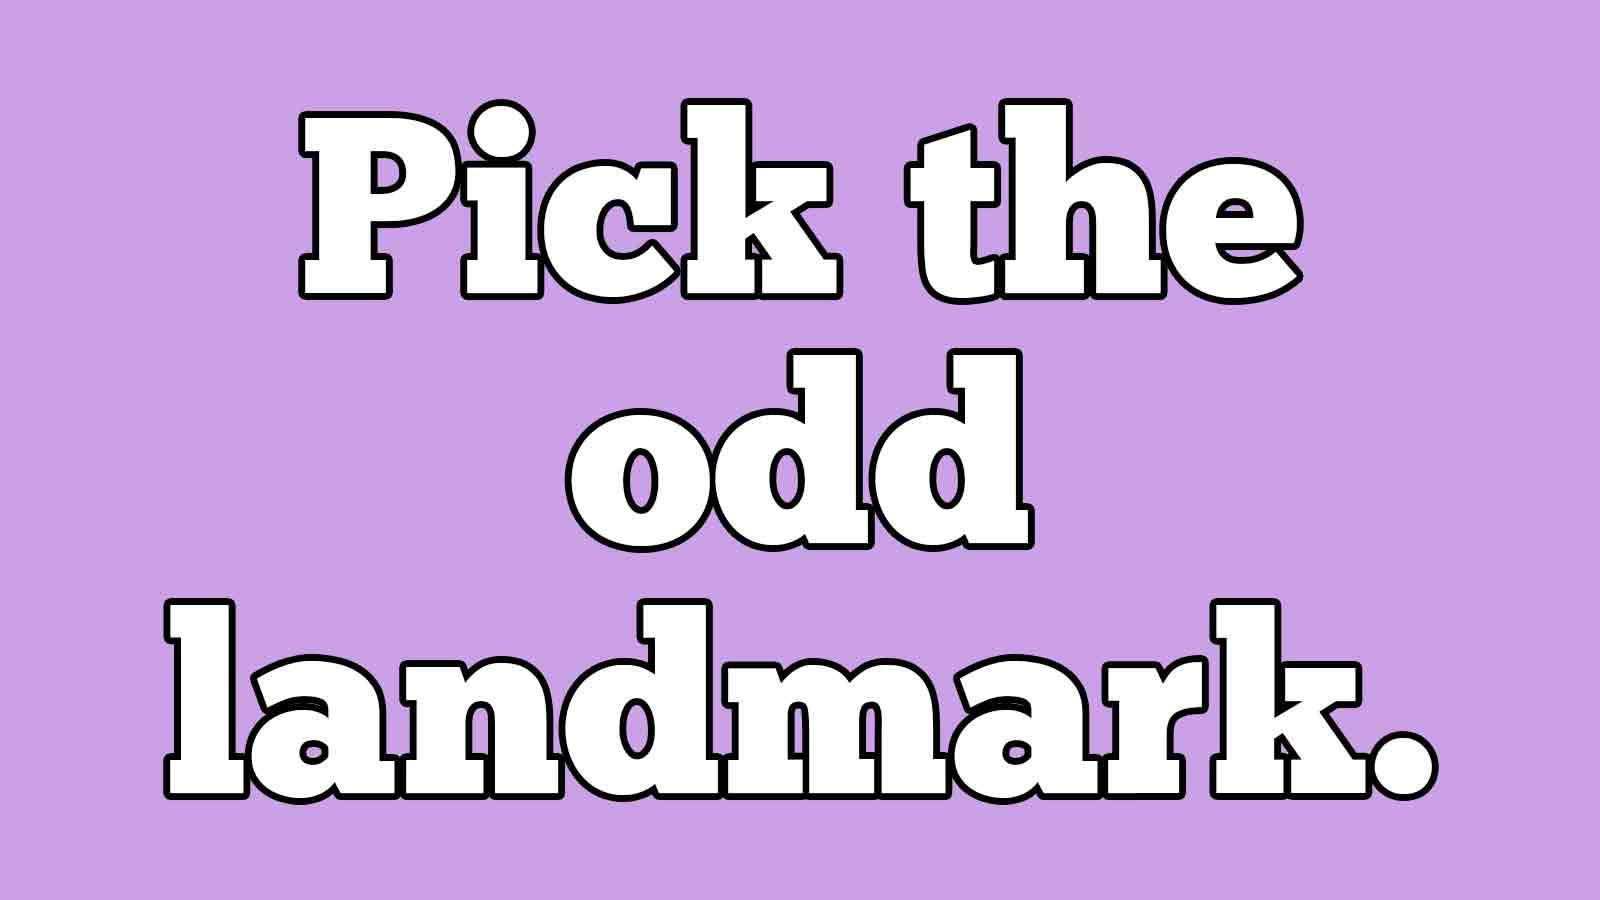 Can You Score 15/15 in This Mildly Infuriating “Odd One Out” Quiz? 334